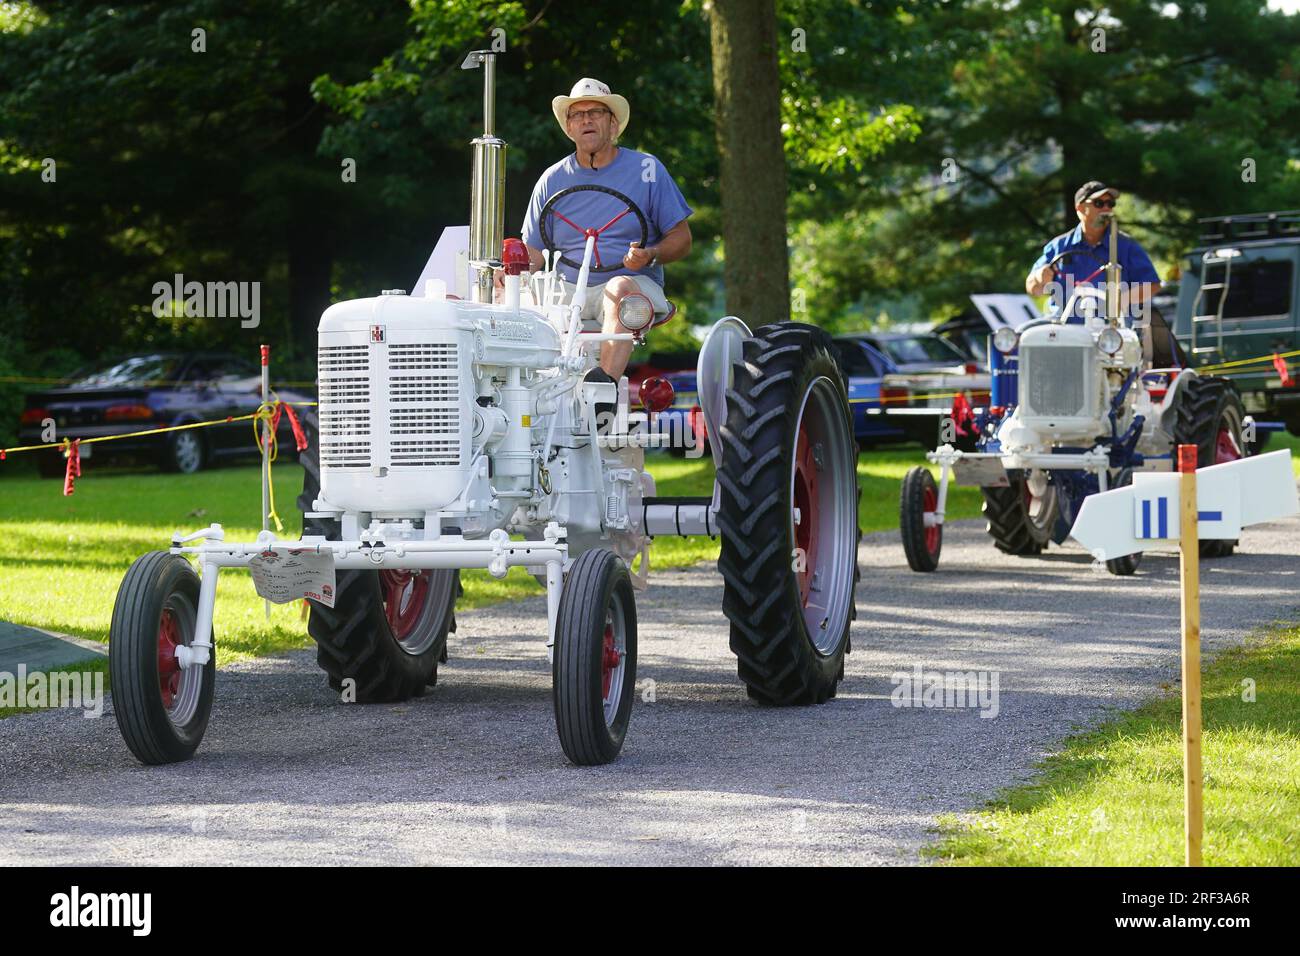 Vintage International farm tractor at a car show. Stock Photo